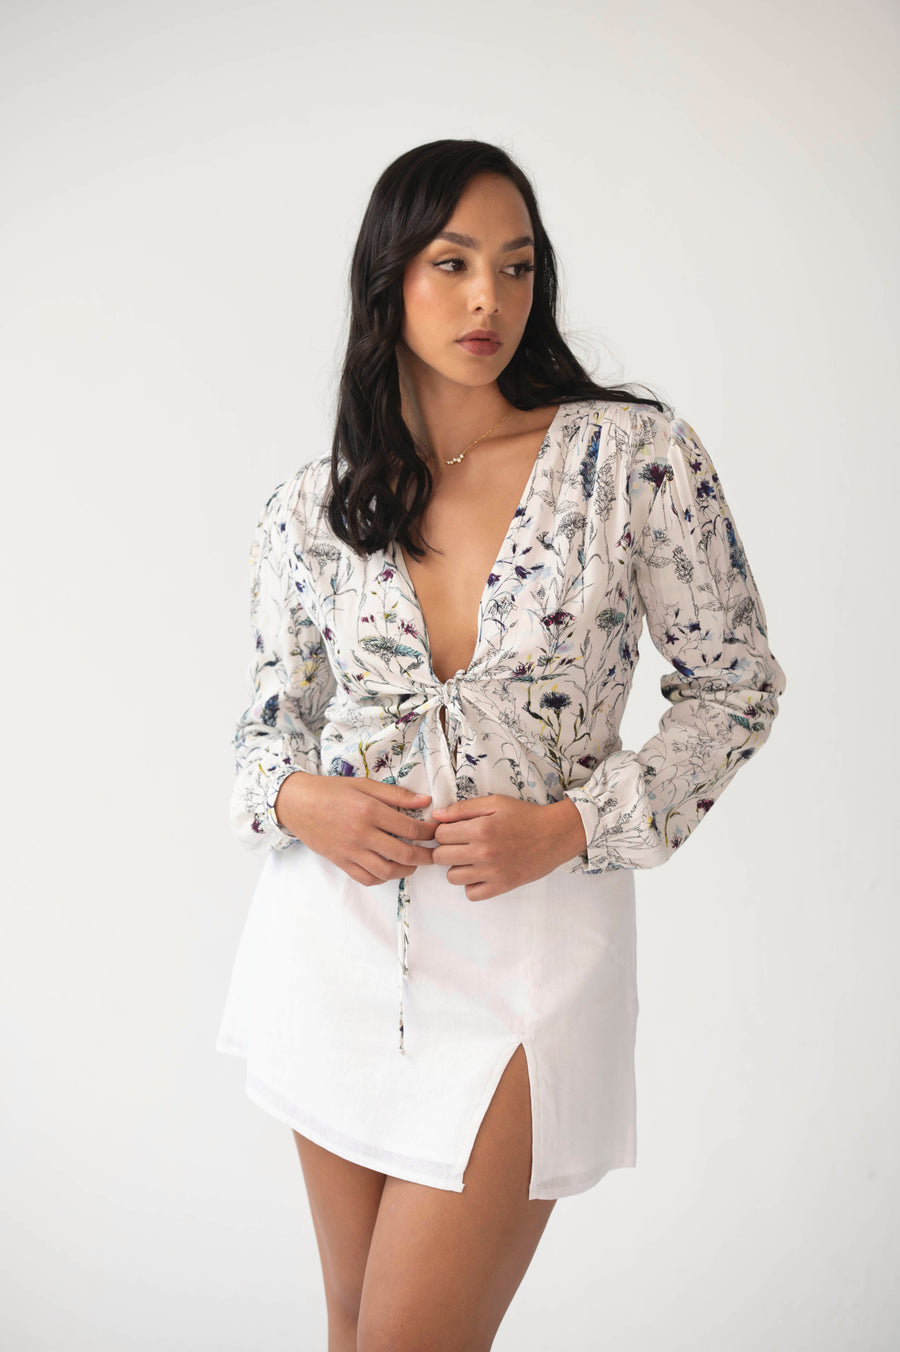 The Aida Top in White Floral